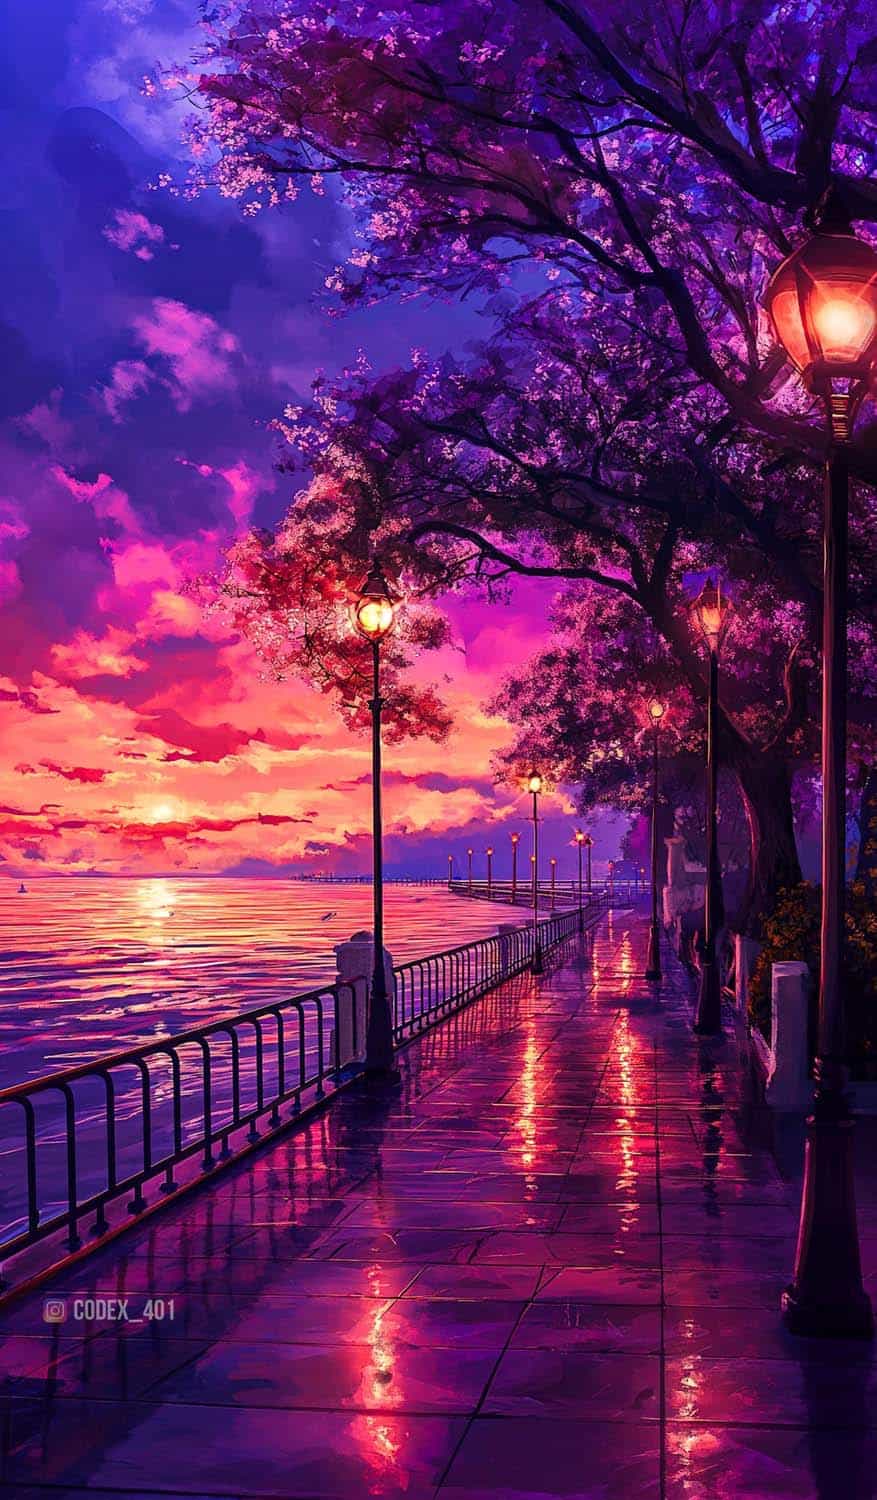 Evening Lake By codex 401 iPhone Wallpaper HD